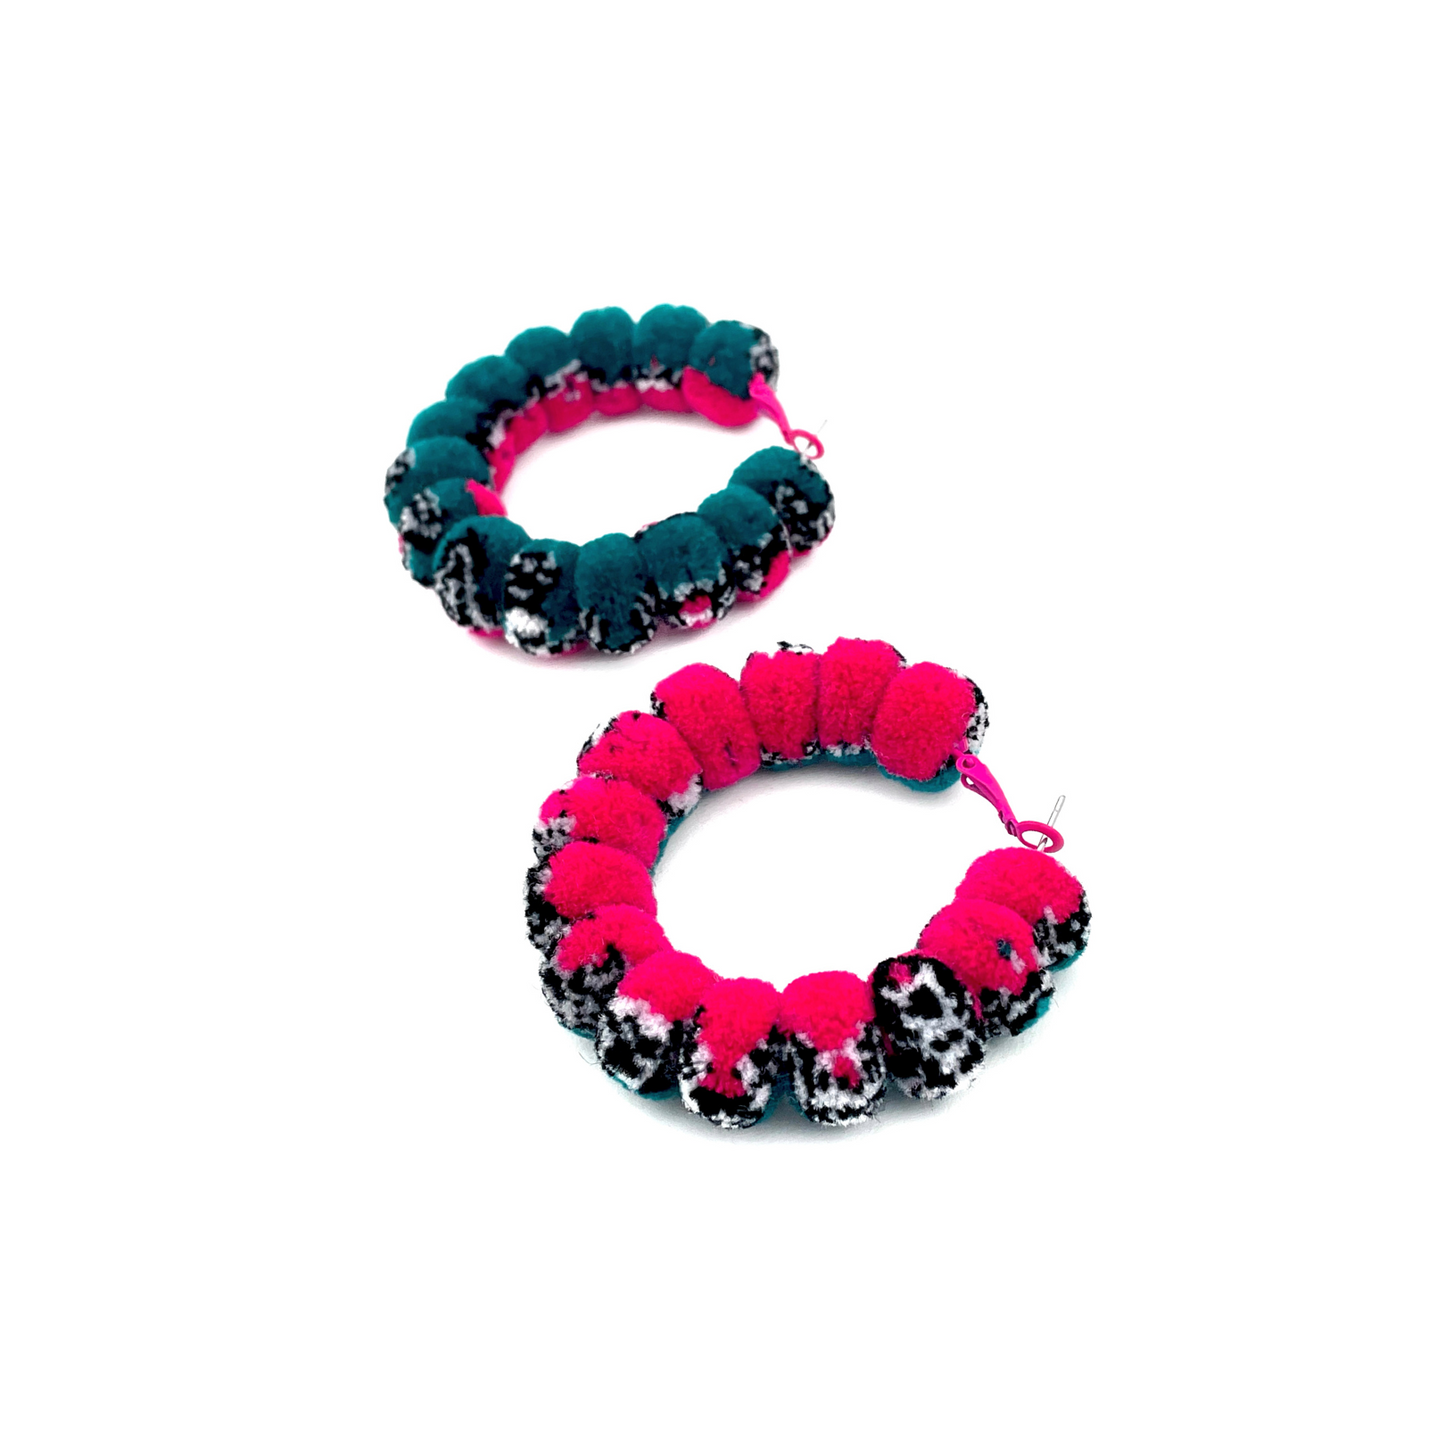 pom'd full painted hoops in techno teal